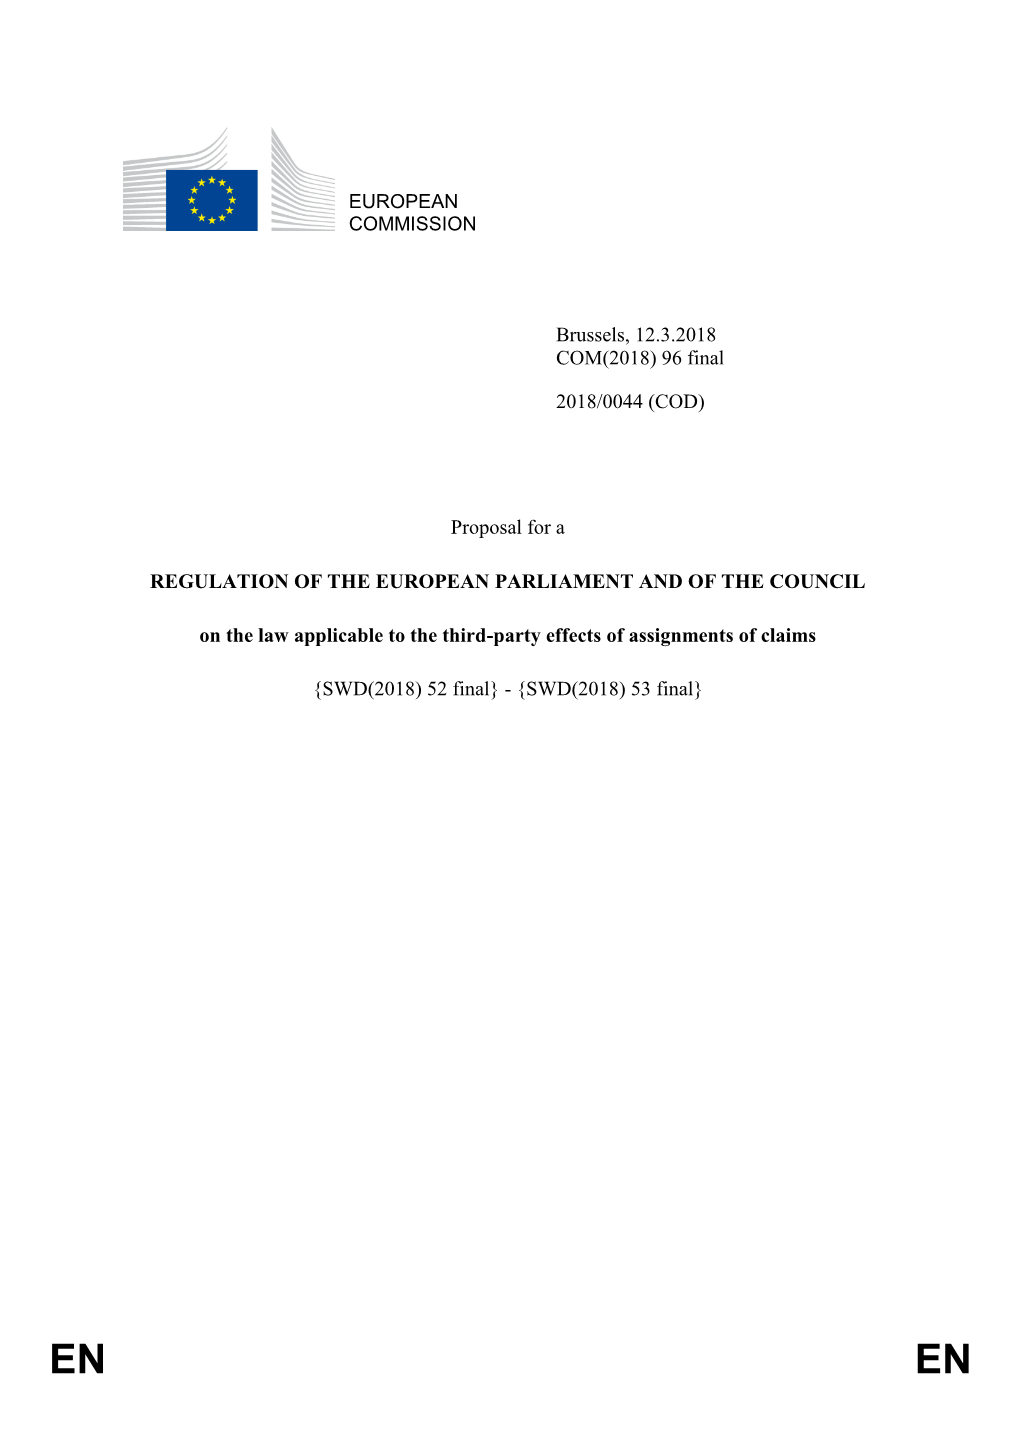 96 Final 2018/0044 (COD) Proposal for a REGULATION of the EUROPEAN PARLIAMENT